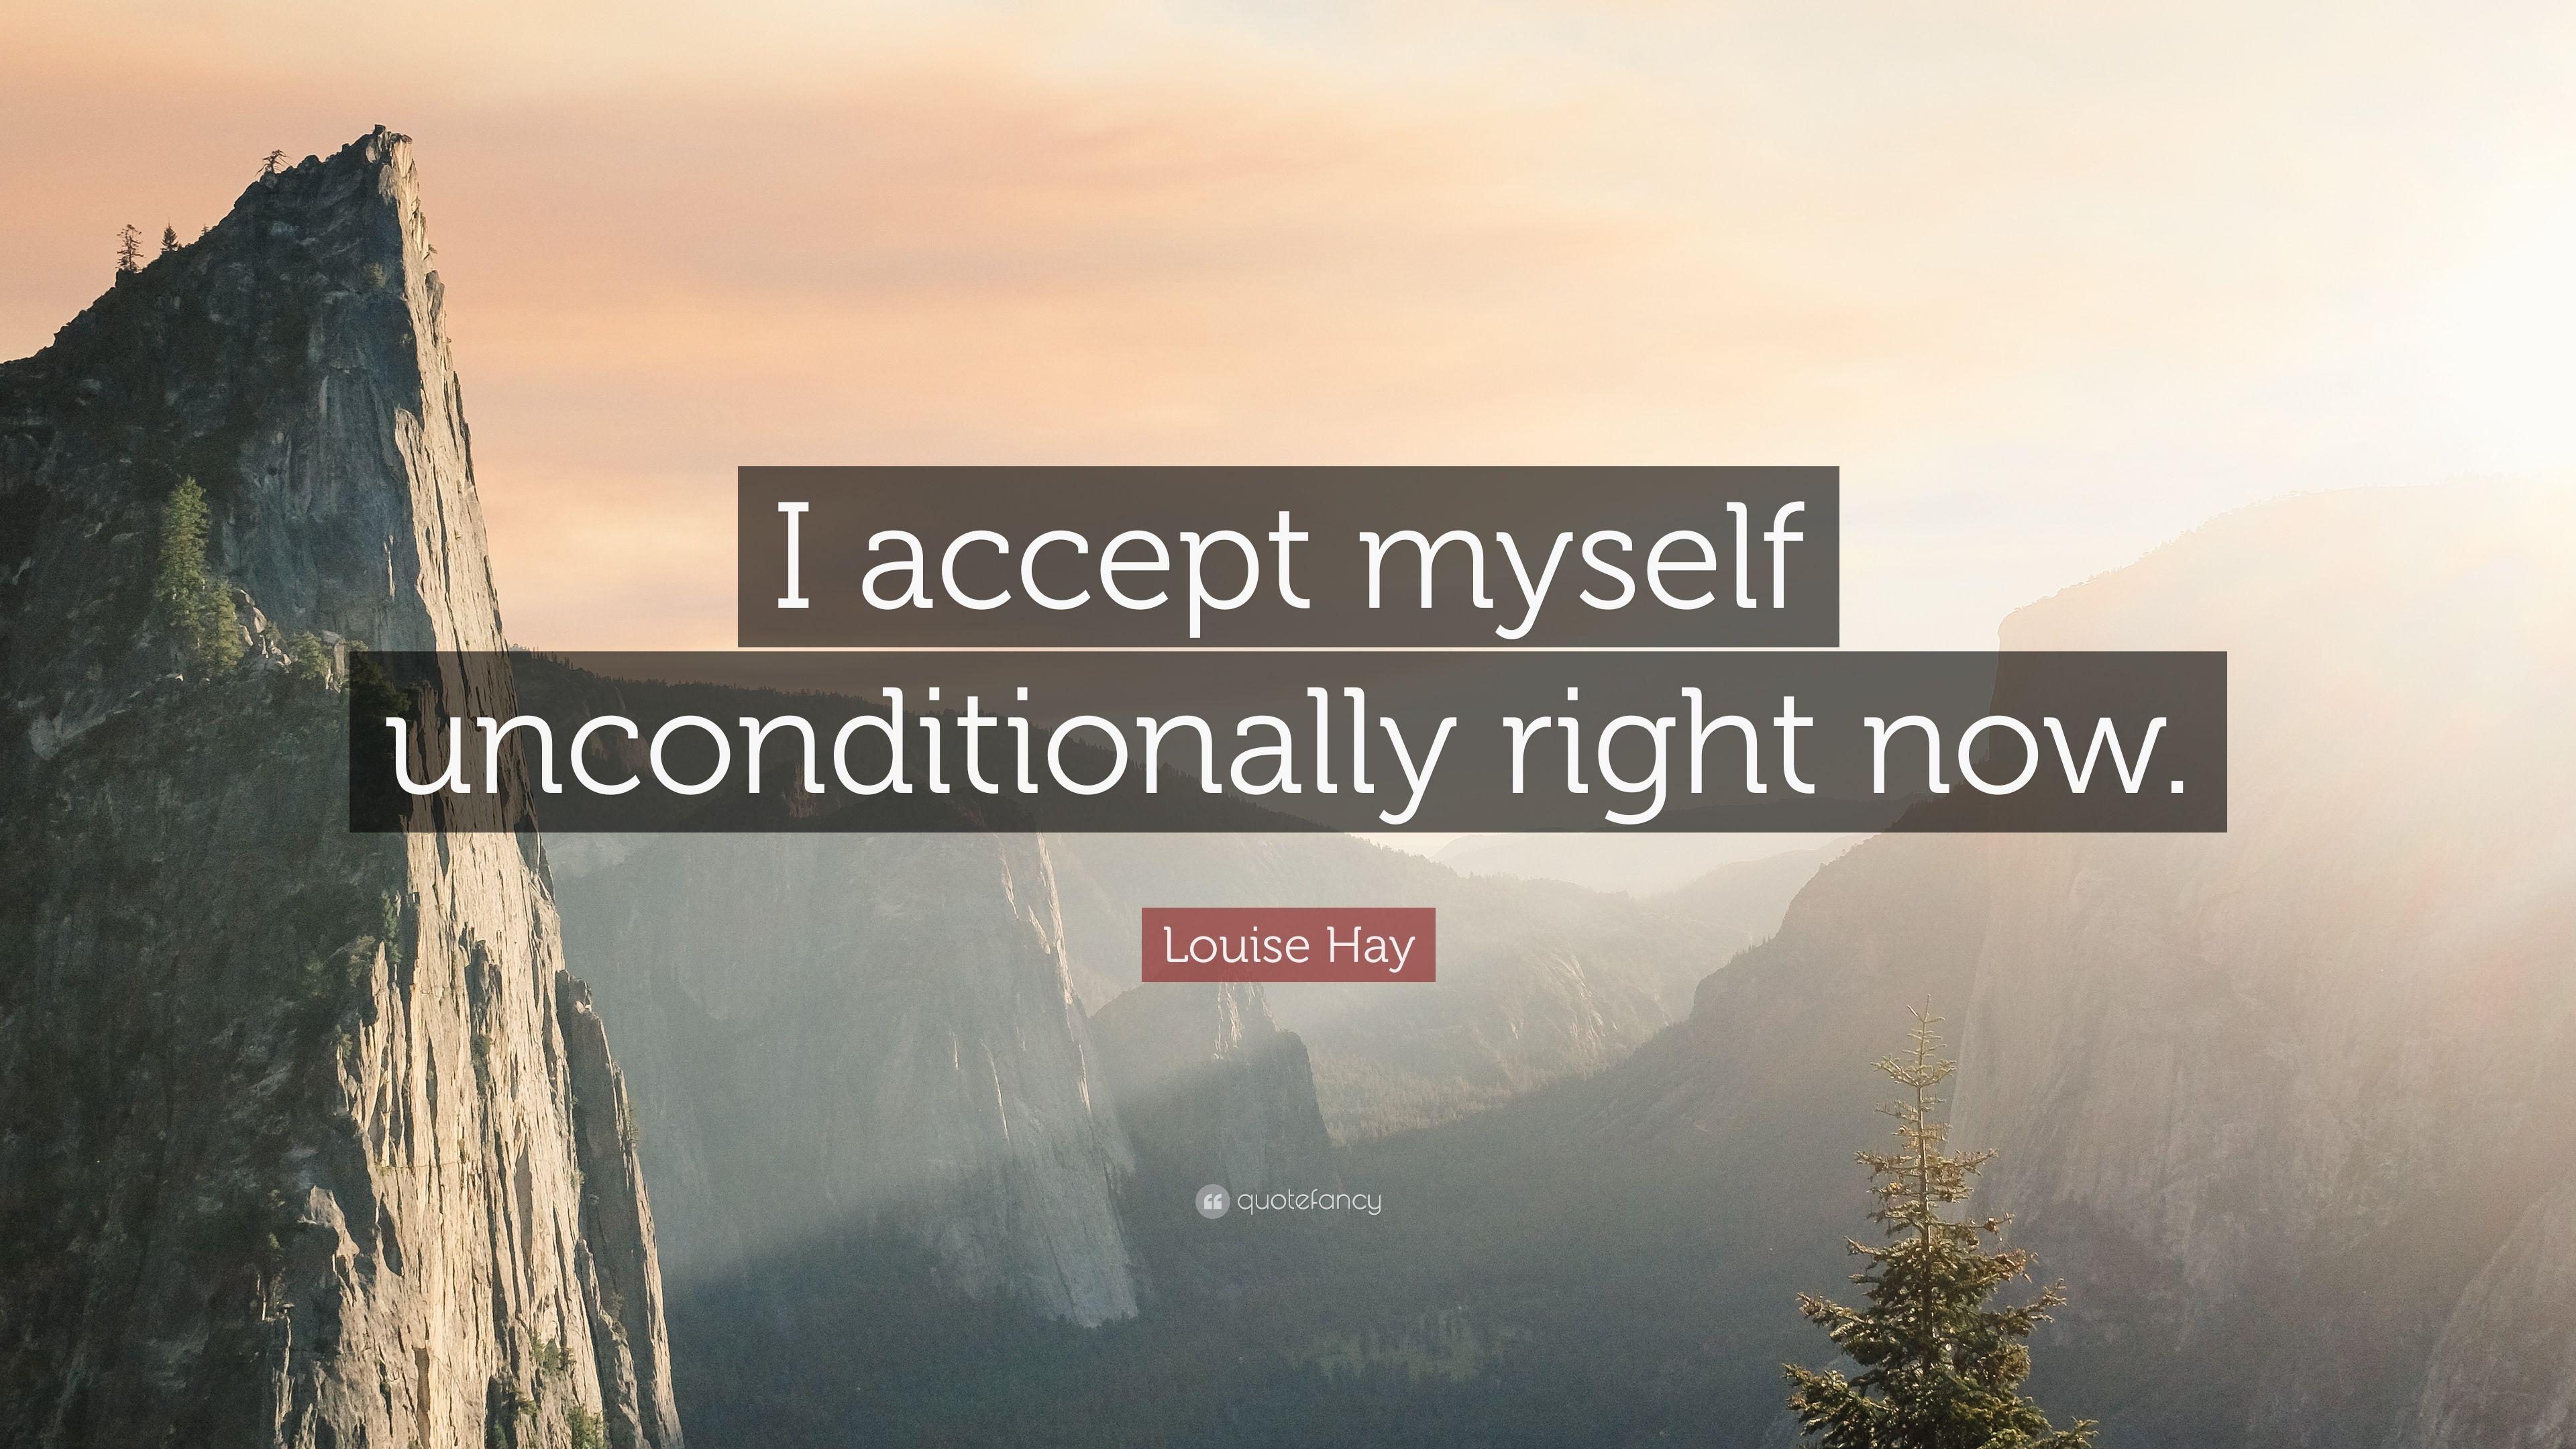 Louise Hay Quote: “I accept myself unconditionally right now.” 10